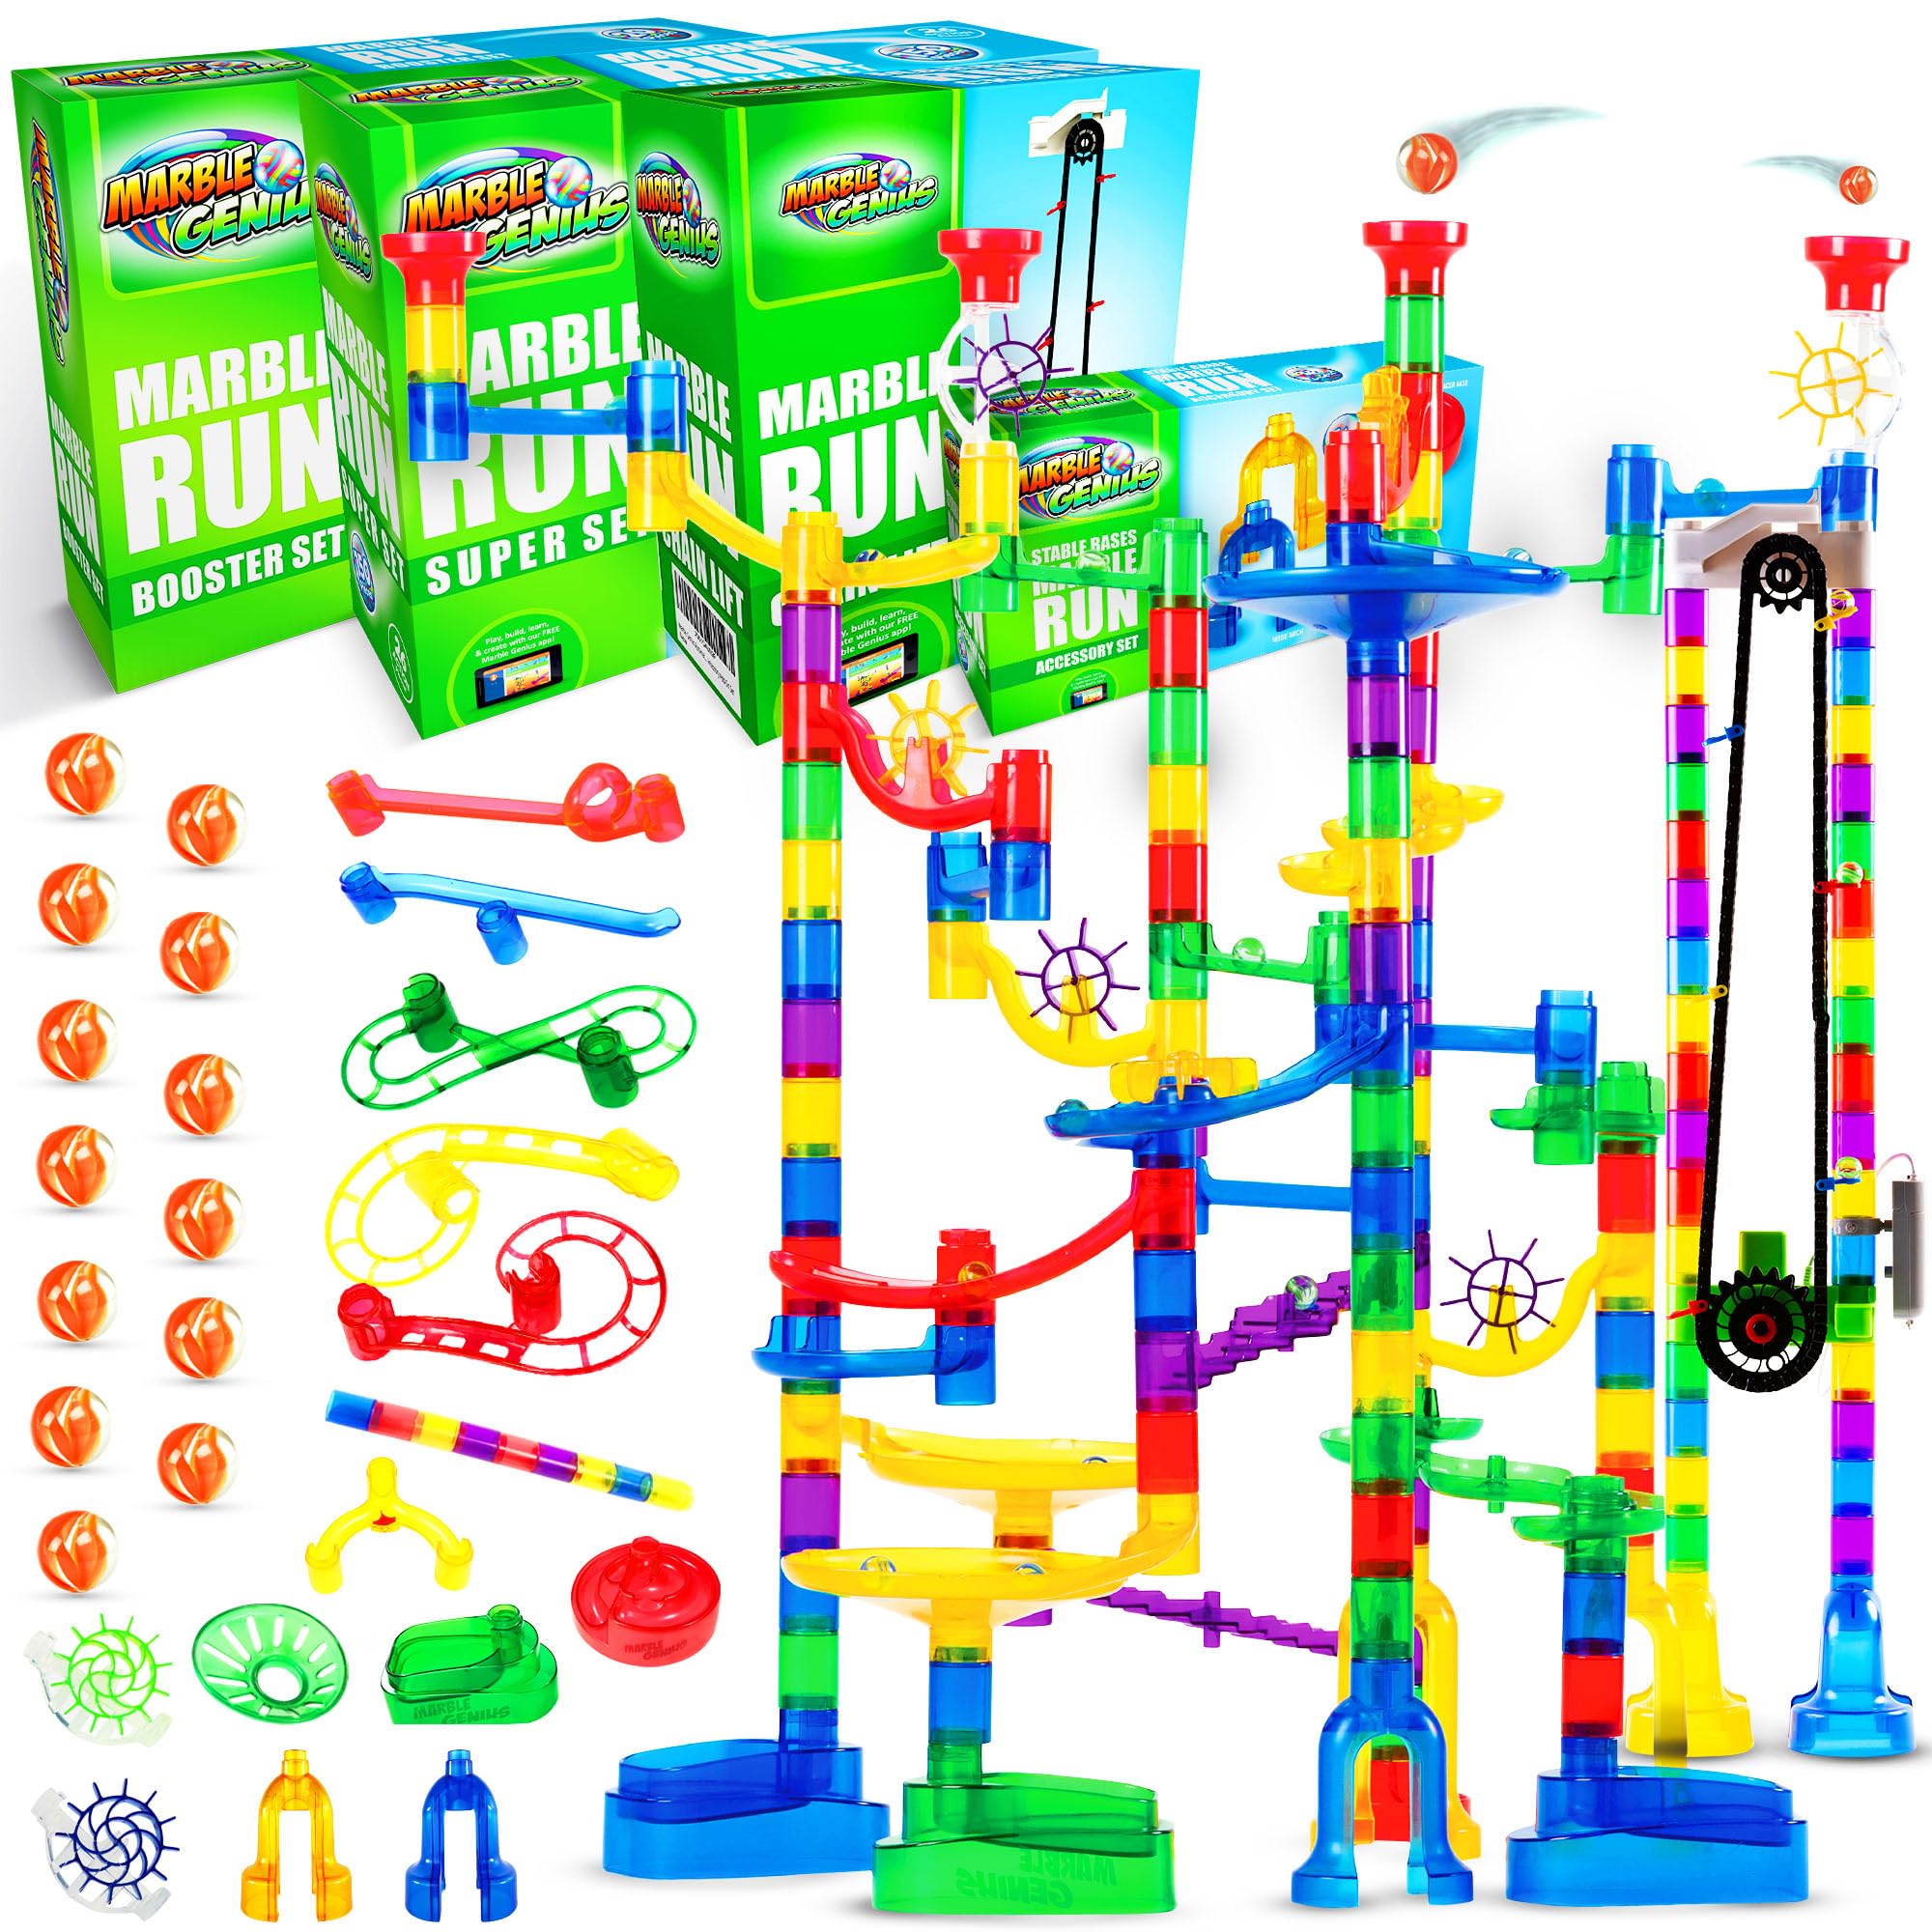 Marble Genius Bundle: Super Set (150 Pieces), Automatic Chain Lift, Primary Booster Set (20 Pieces), and Stable Bases (4 Pieces), Perfect for Kids and Adult Alike